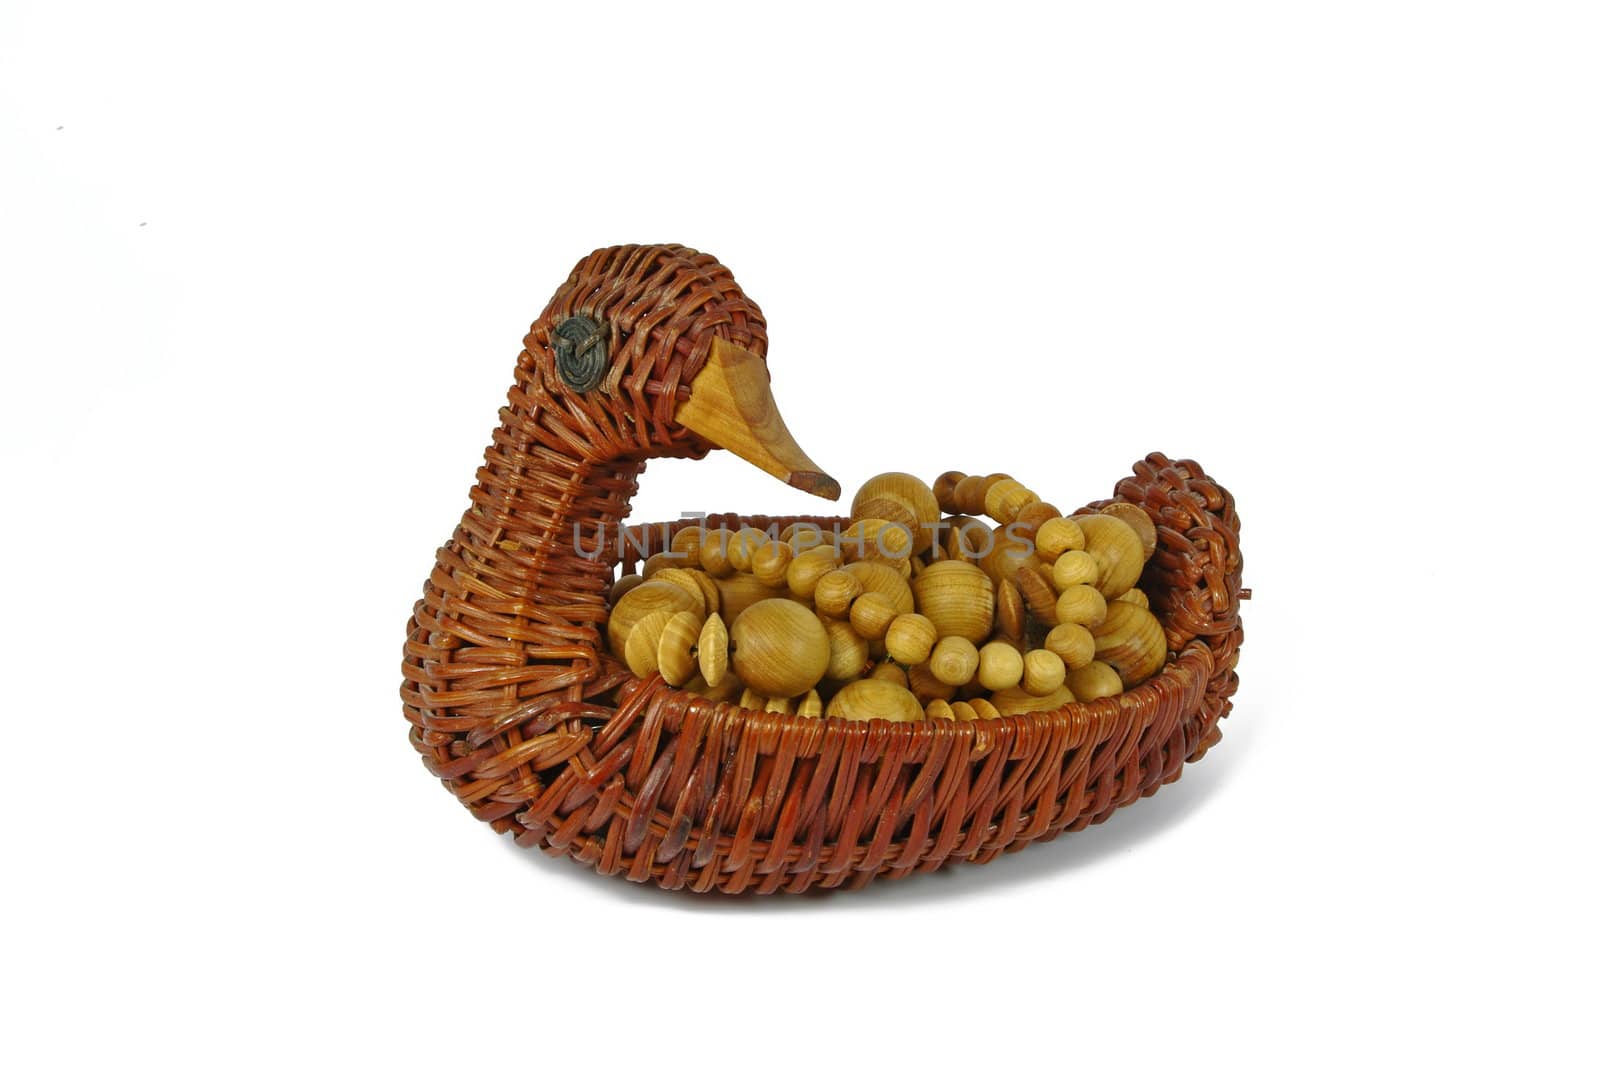 Wicker contaimer in form of duck with beads by Vitamin